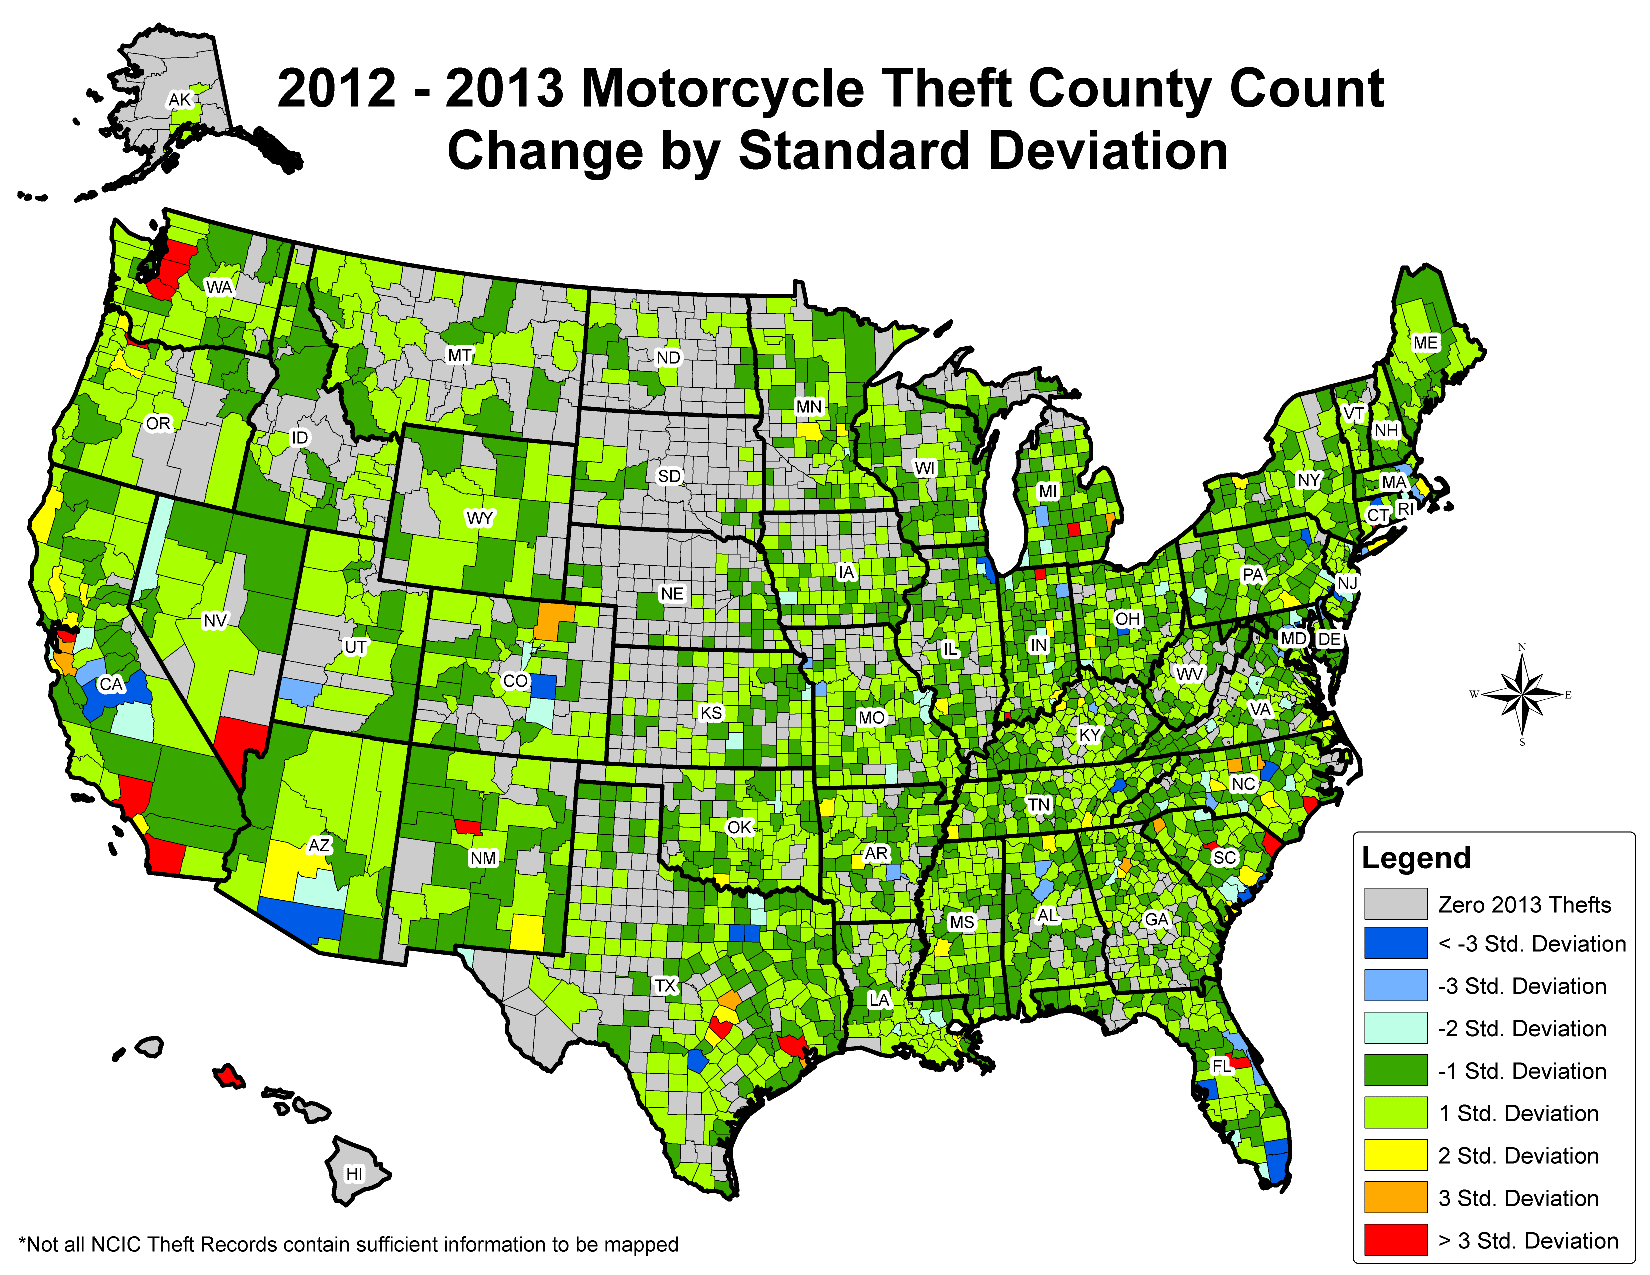 Page 14 of 28 The following map illustrates a total list of counties and their theft count change for 2012-2013 by standard deviation. The U.S.